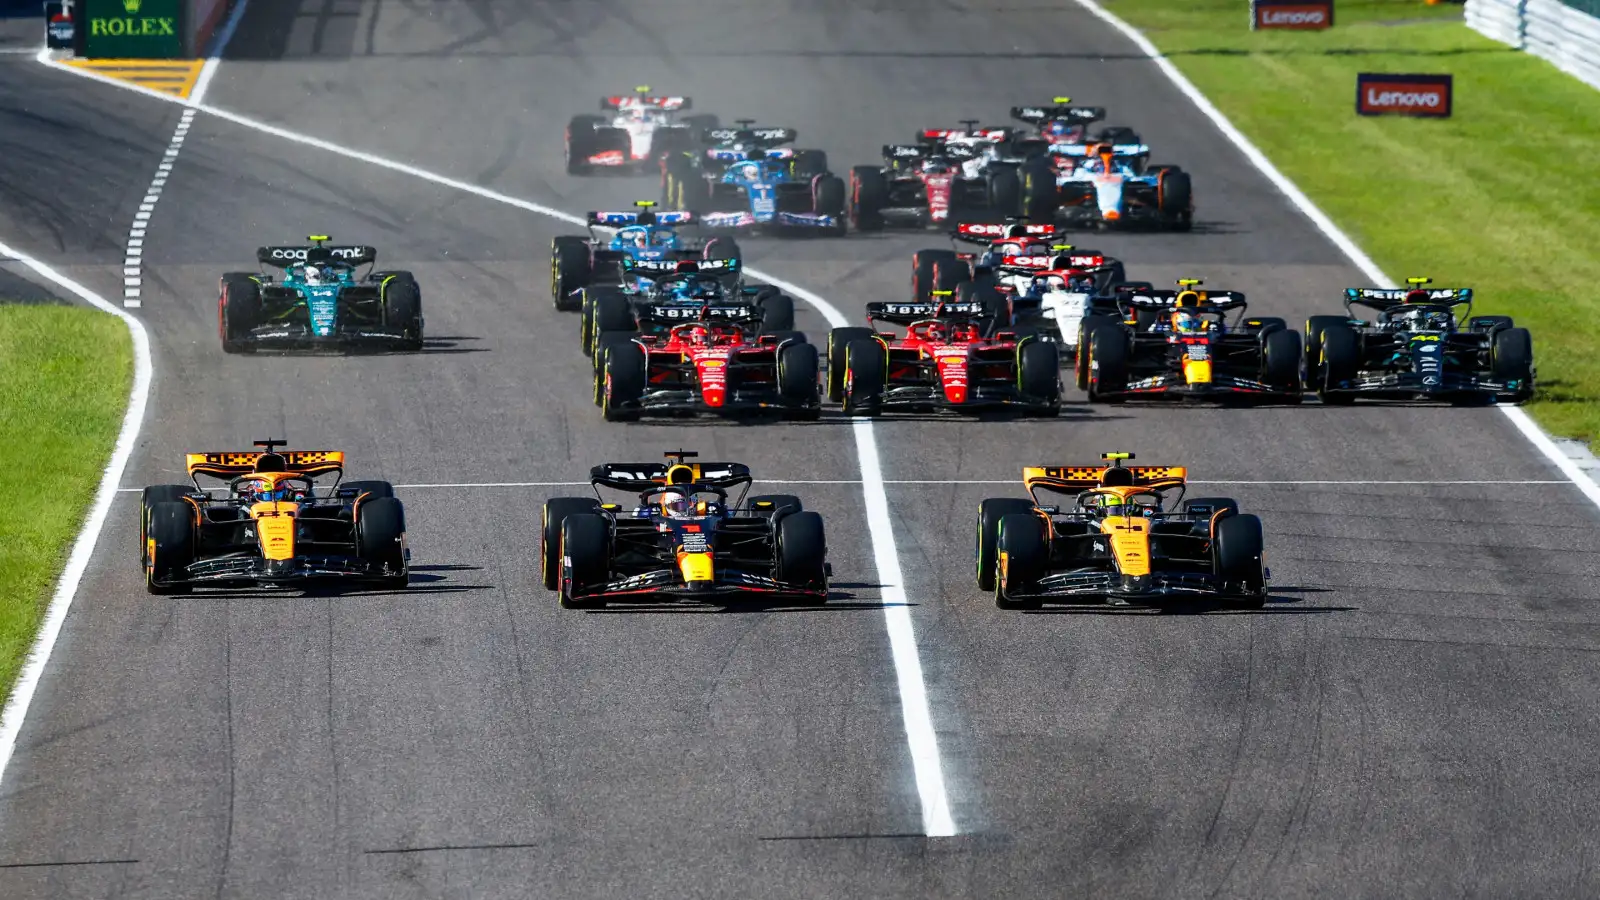 Red Bull's Max Verstappen holds onto the lead at the start of the Japanese Grand Prix.